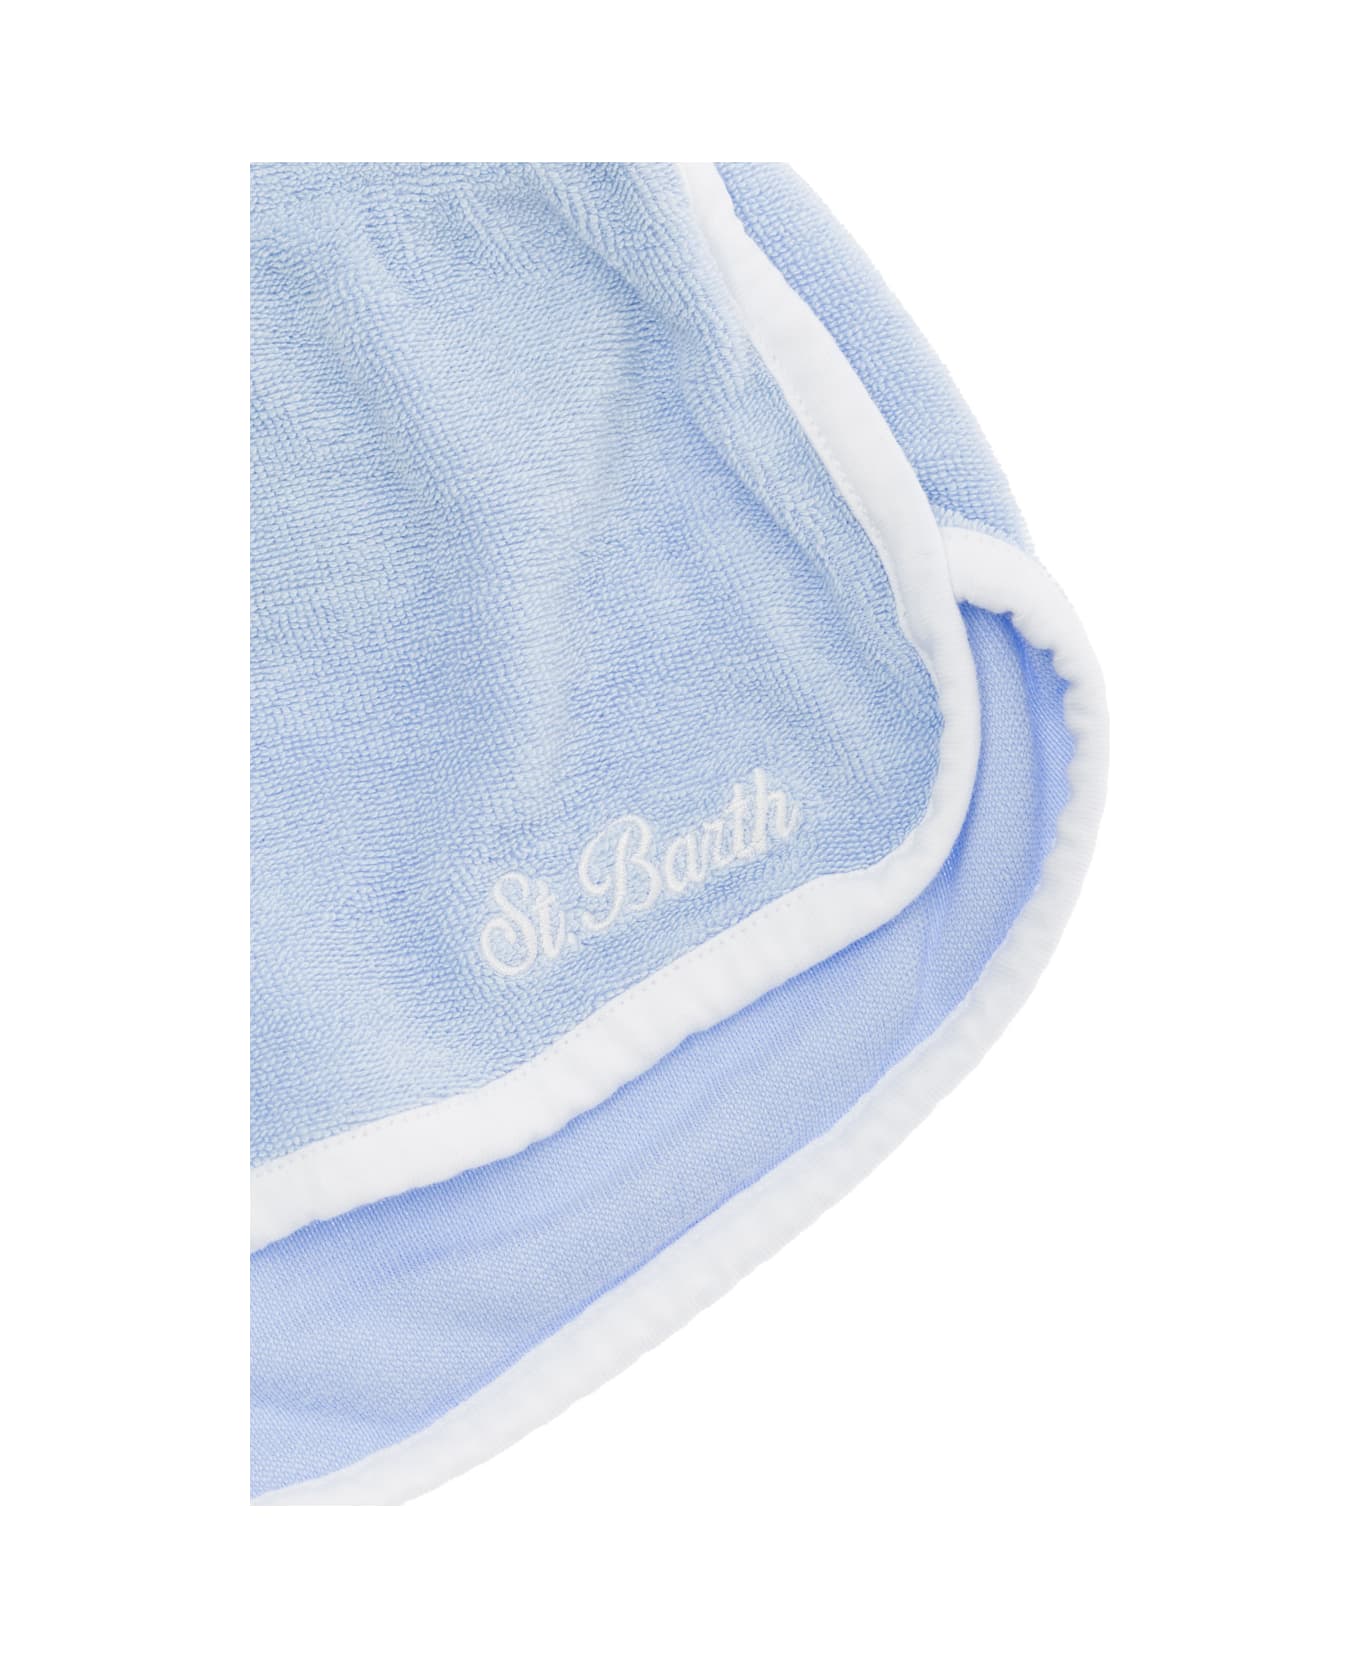 MC2 Saint Barth Light Blue Shorts With Logo Lettering Embroidery In Cotton Blend Boy - Light blue